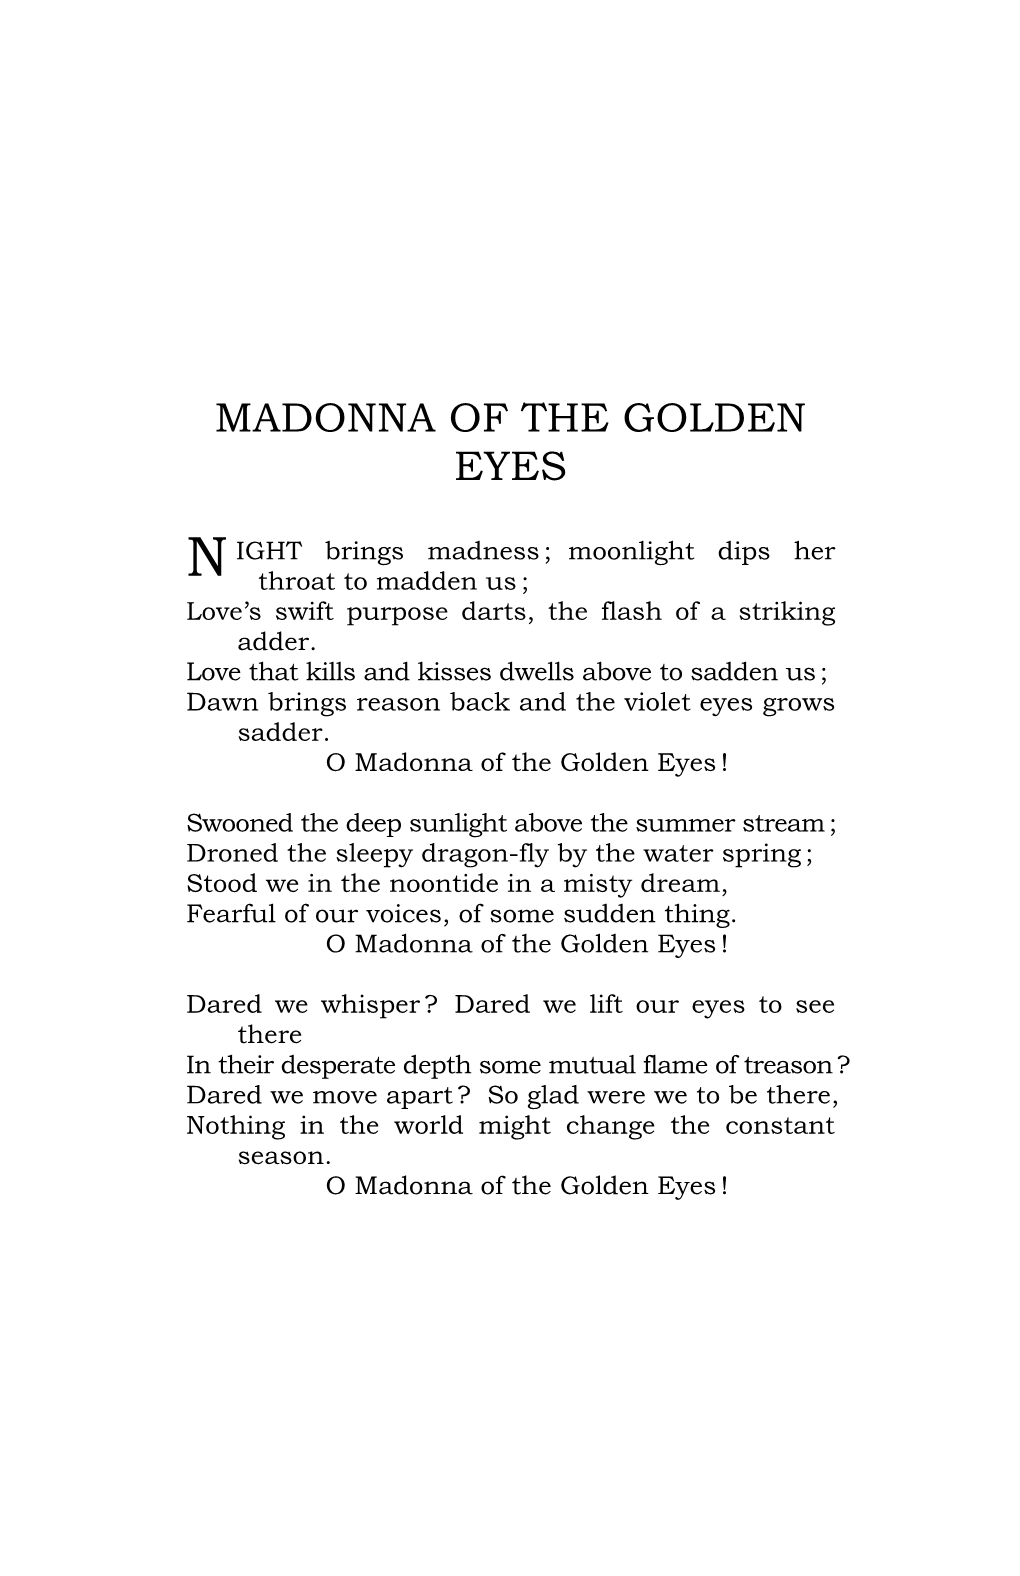 Madonna of the Golden Eyes